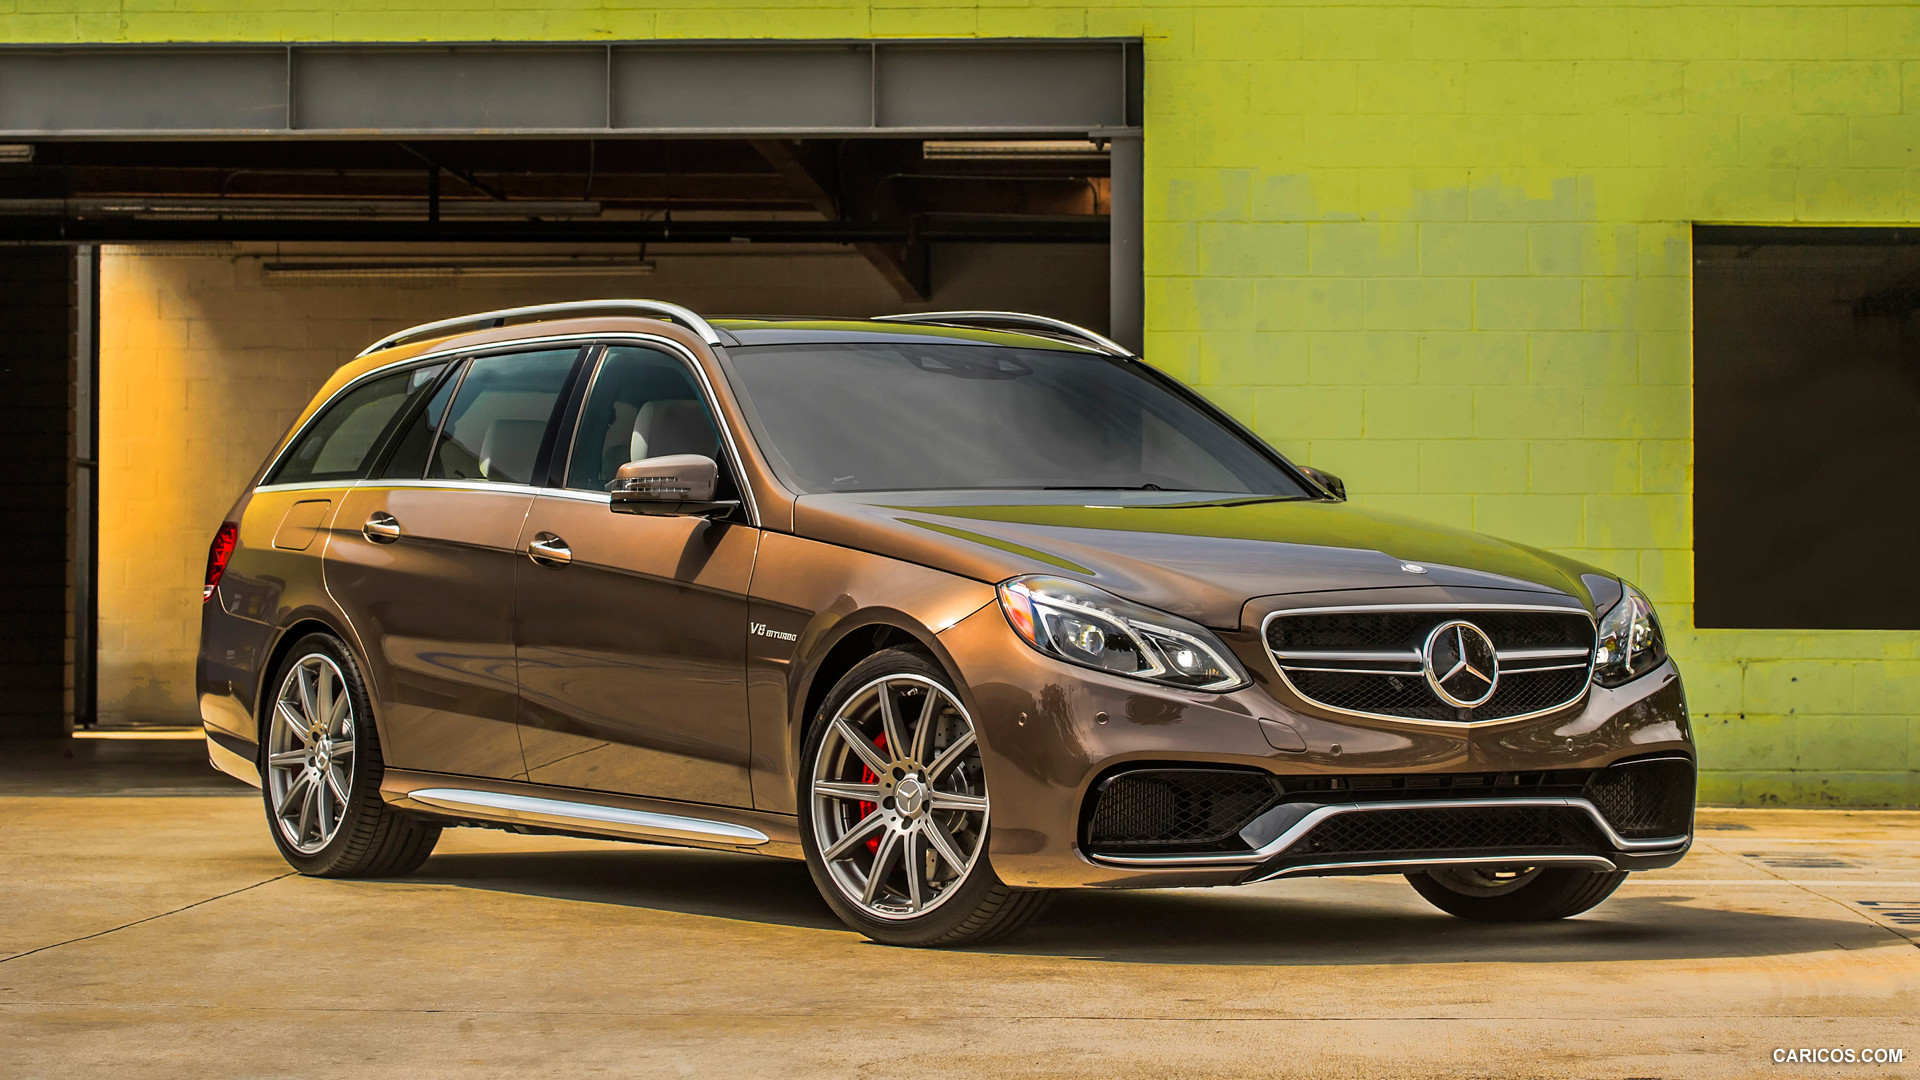  2014 Mercedes-Benz E 63 AMG S-Model Wagon (US Version) - Front, #17 of 27